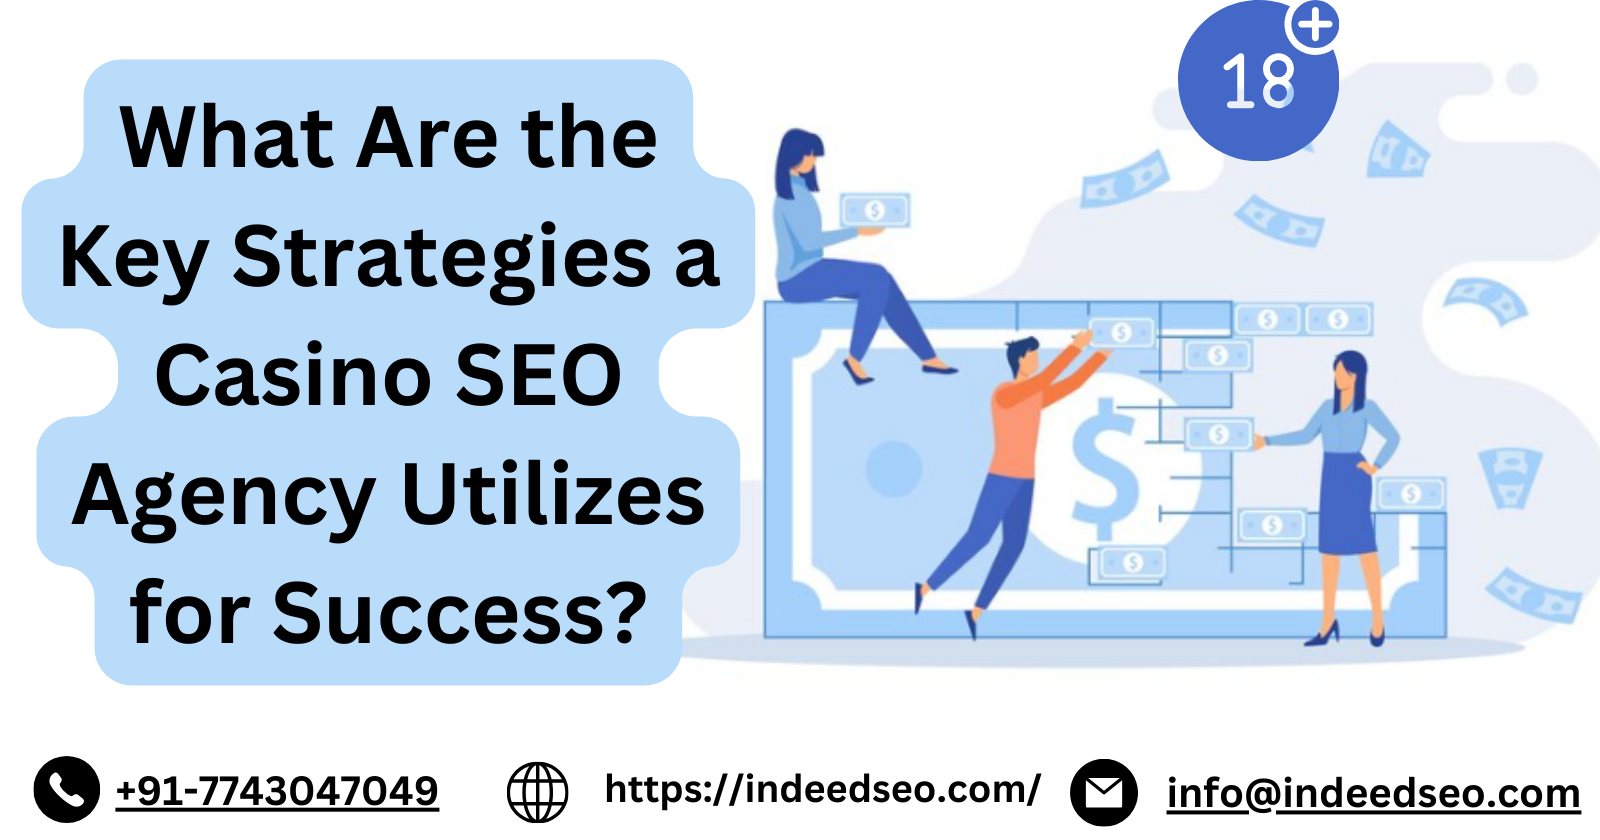 What Are the Key Strategies a Casino SEO Agency Utilizes for Success